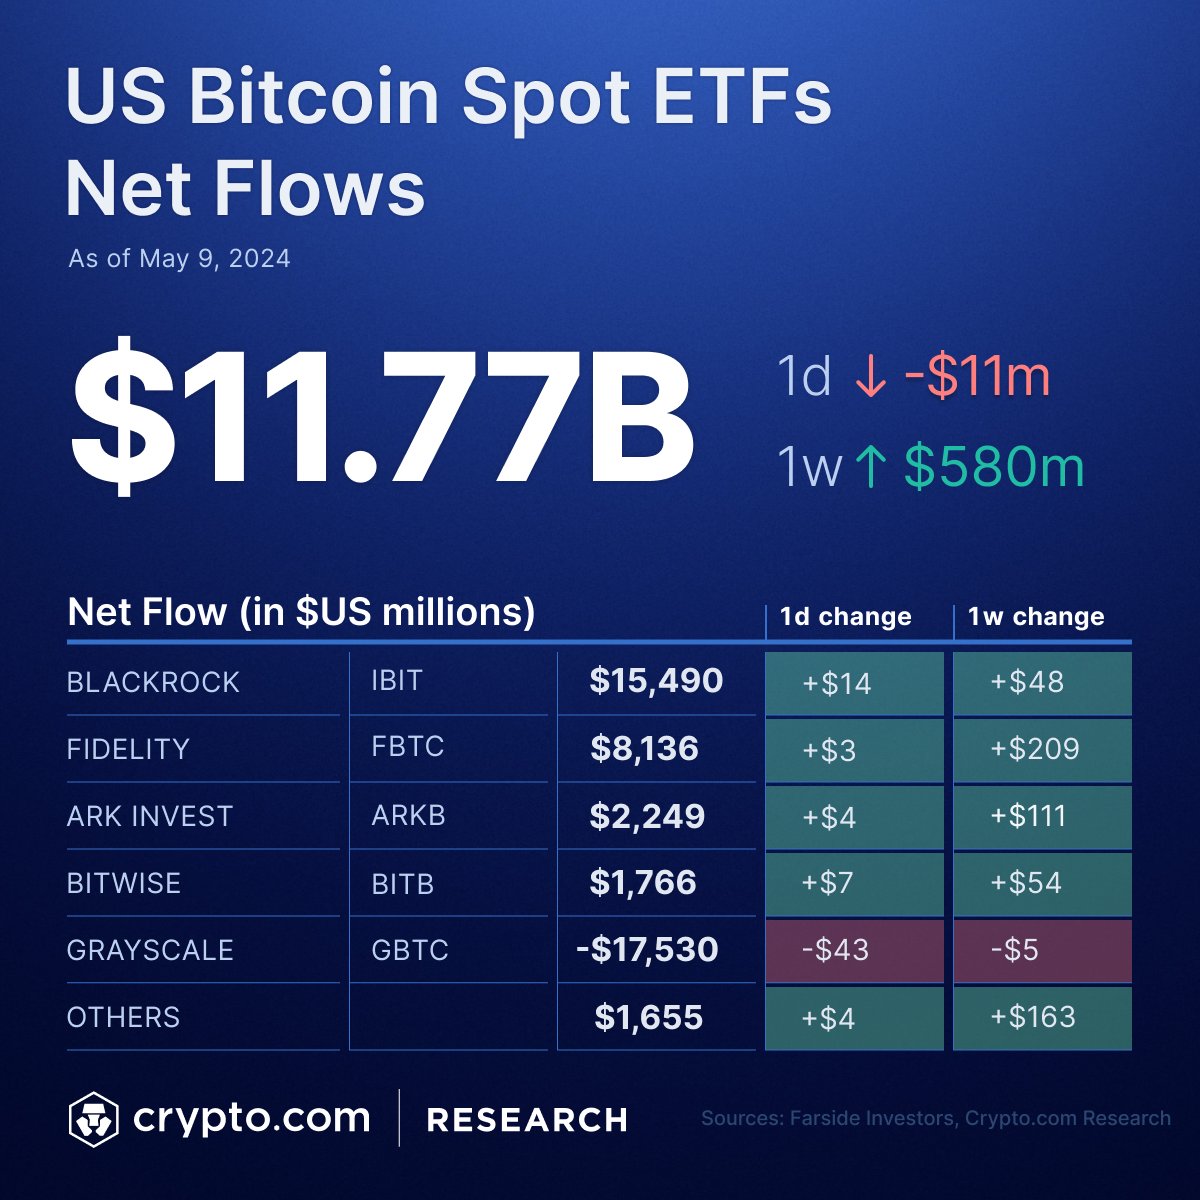 💸 Latest data shows US Spot #Bitcoin ETFs with a total net inflow of $11.77B and a daily net outflow of $11M on 9 May. Grayscale’s GBTC resumed its net outflow of $43M.